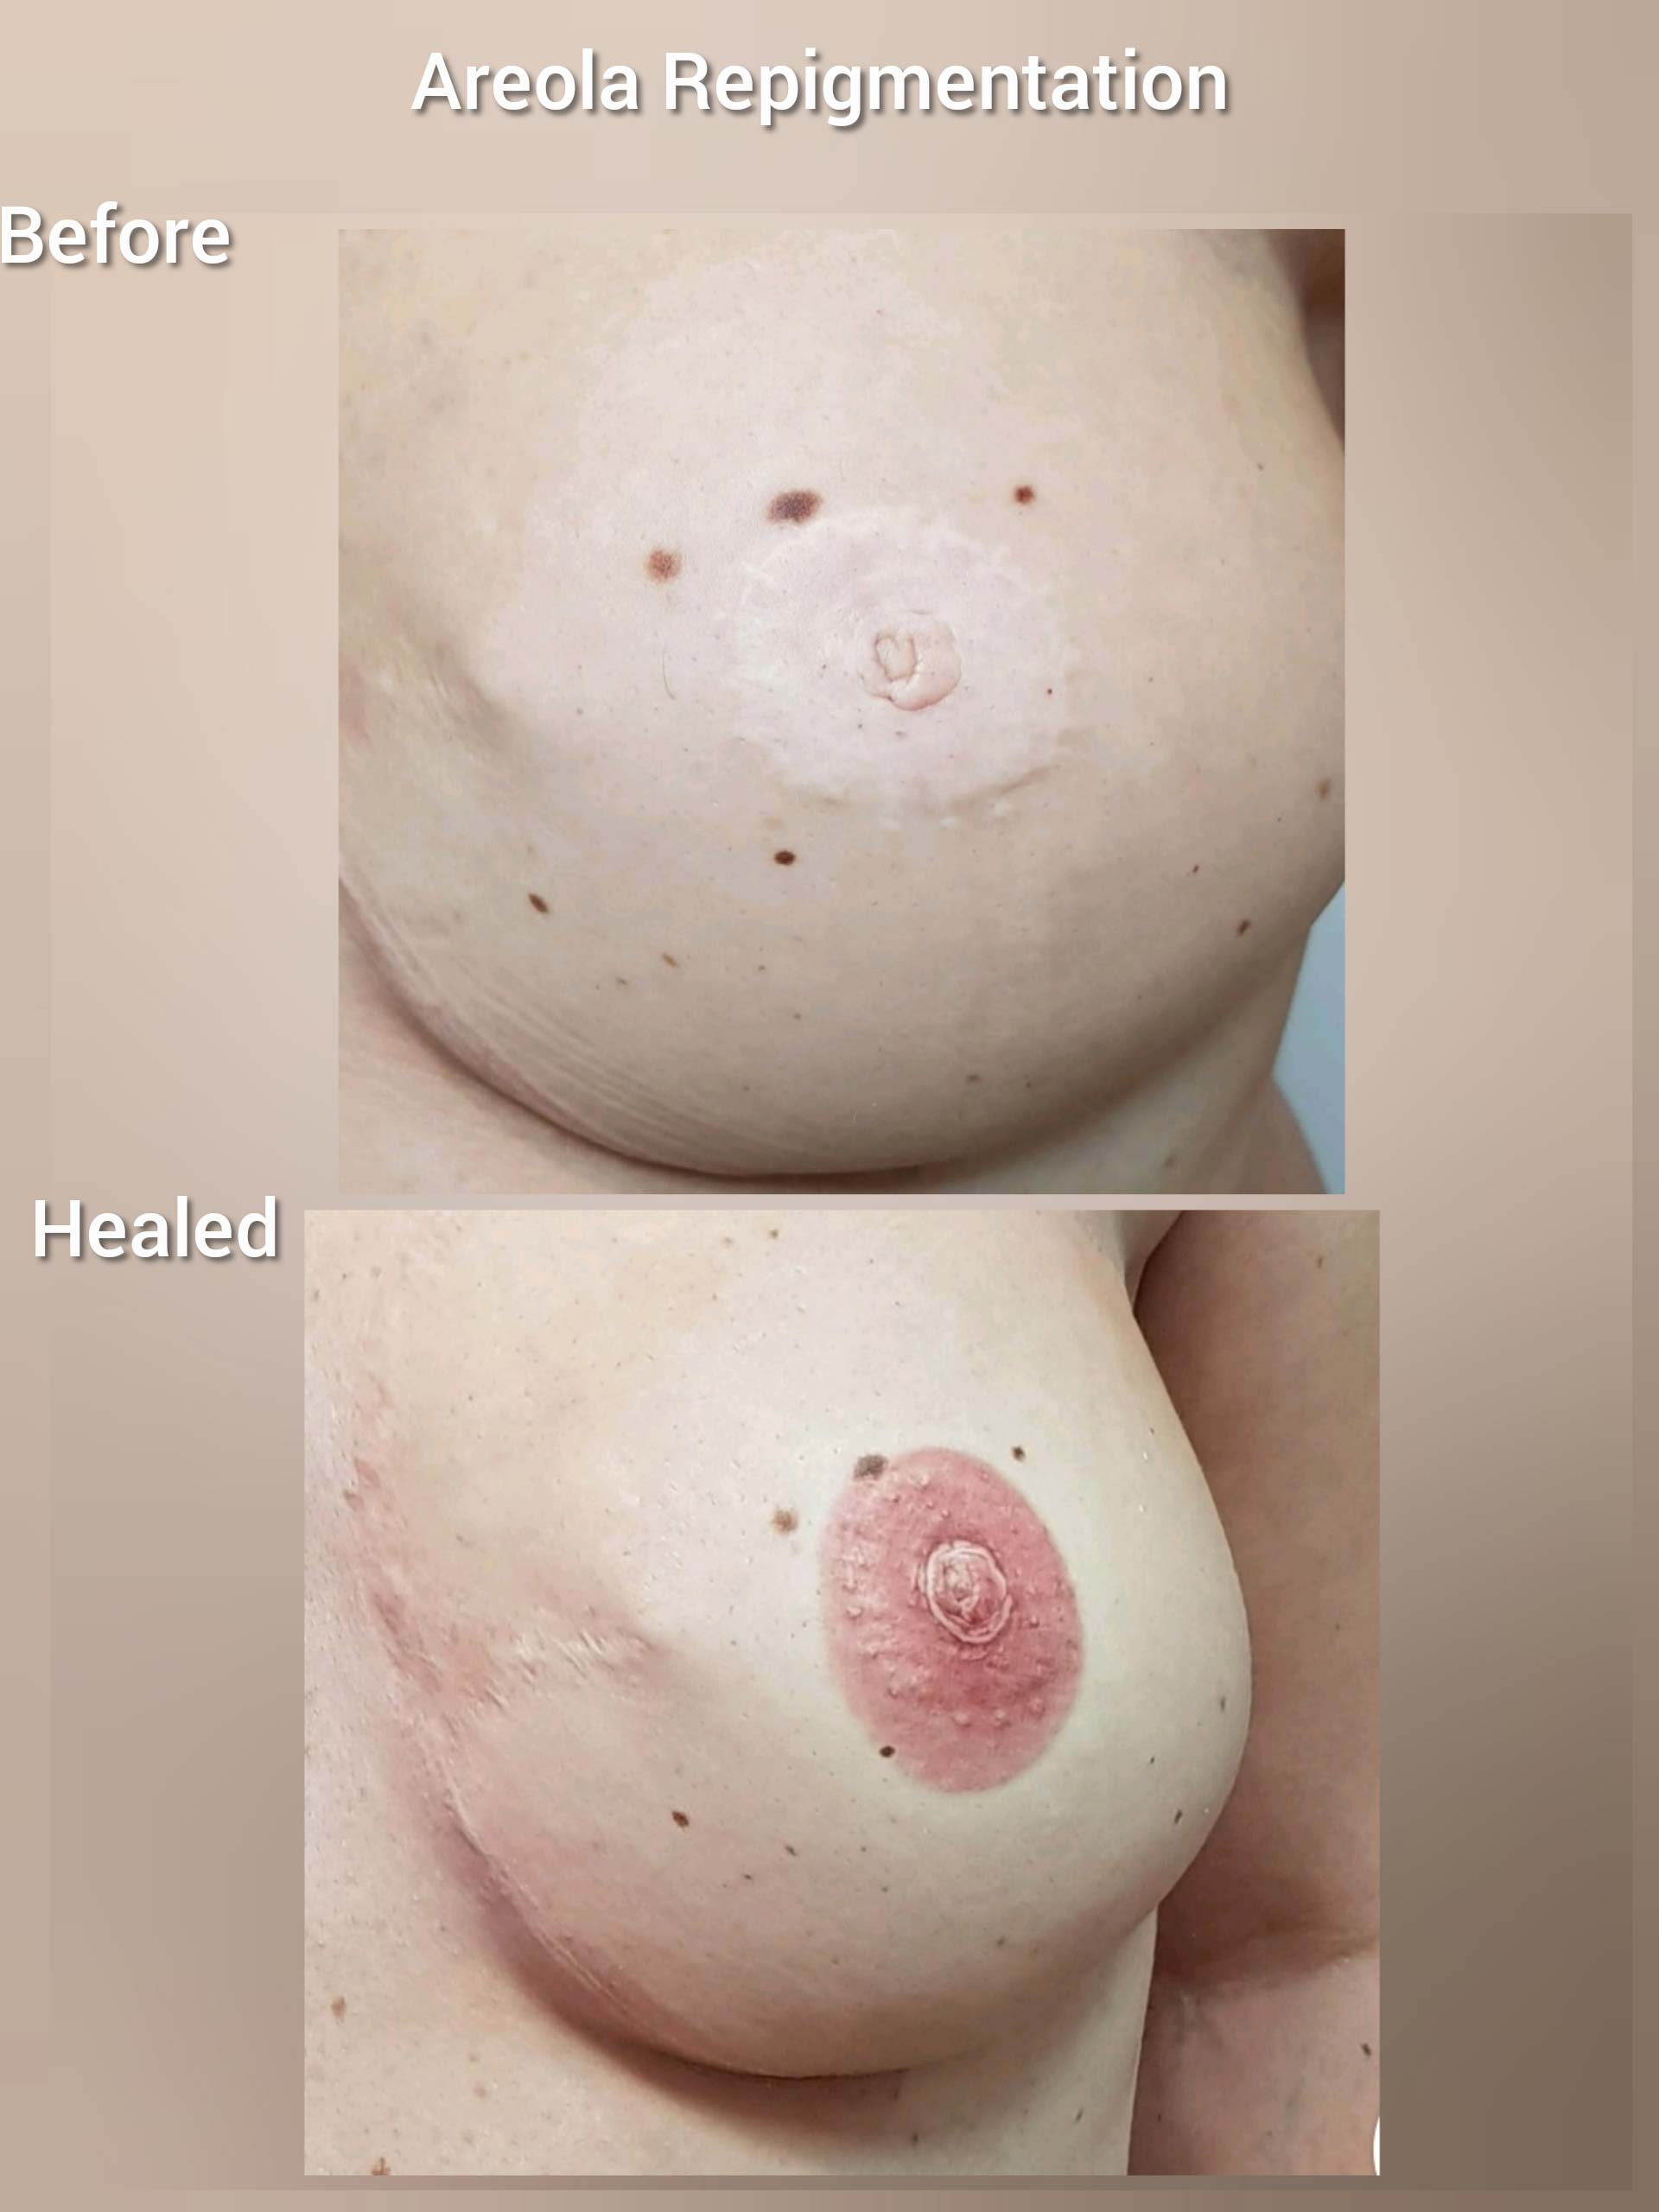 3D Areola Tattoo. Cosmetic and Mediical Tattoo by Dasha. Permanent makeup and reconstructive tattoo, scalp micro-pigmentation in Christchurch, New Zealand